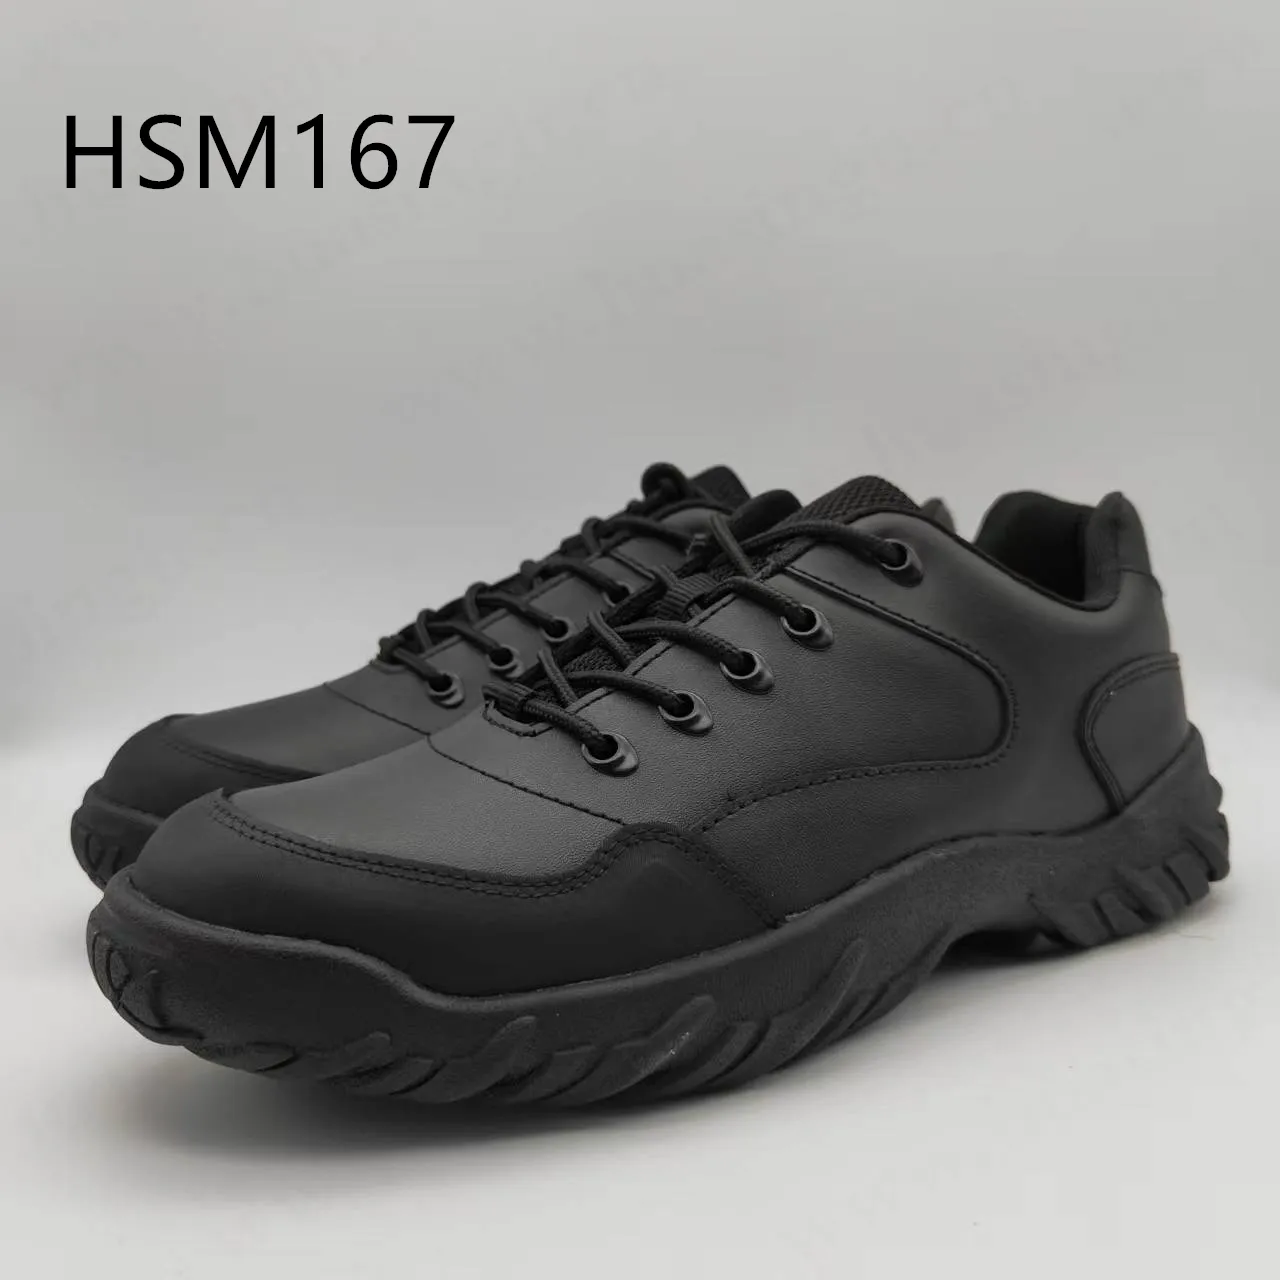 ZH Low-cut Aging Resistant Sole Essentials Outdoor Hiking Shoes Black Anti-tear Natural Cow Leather Combat Boots HSM167